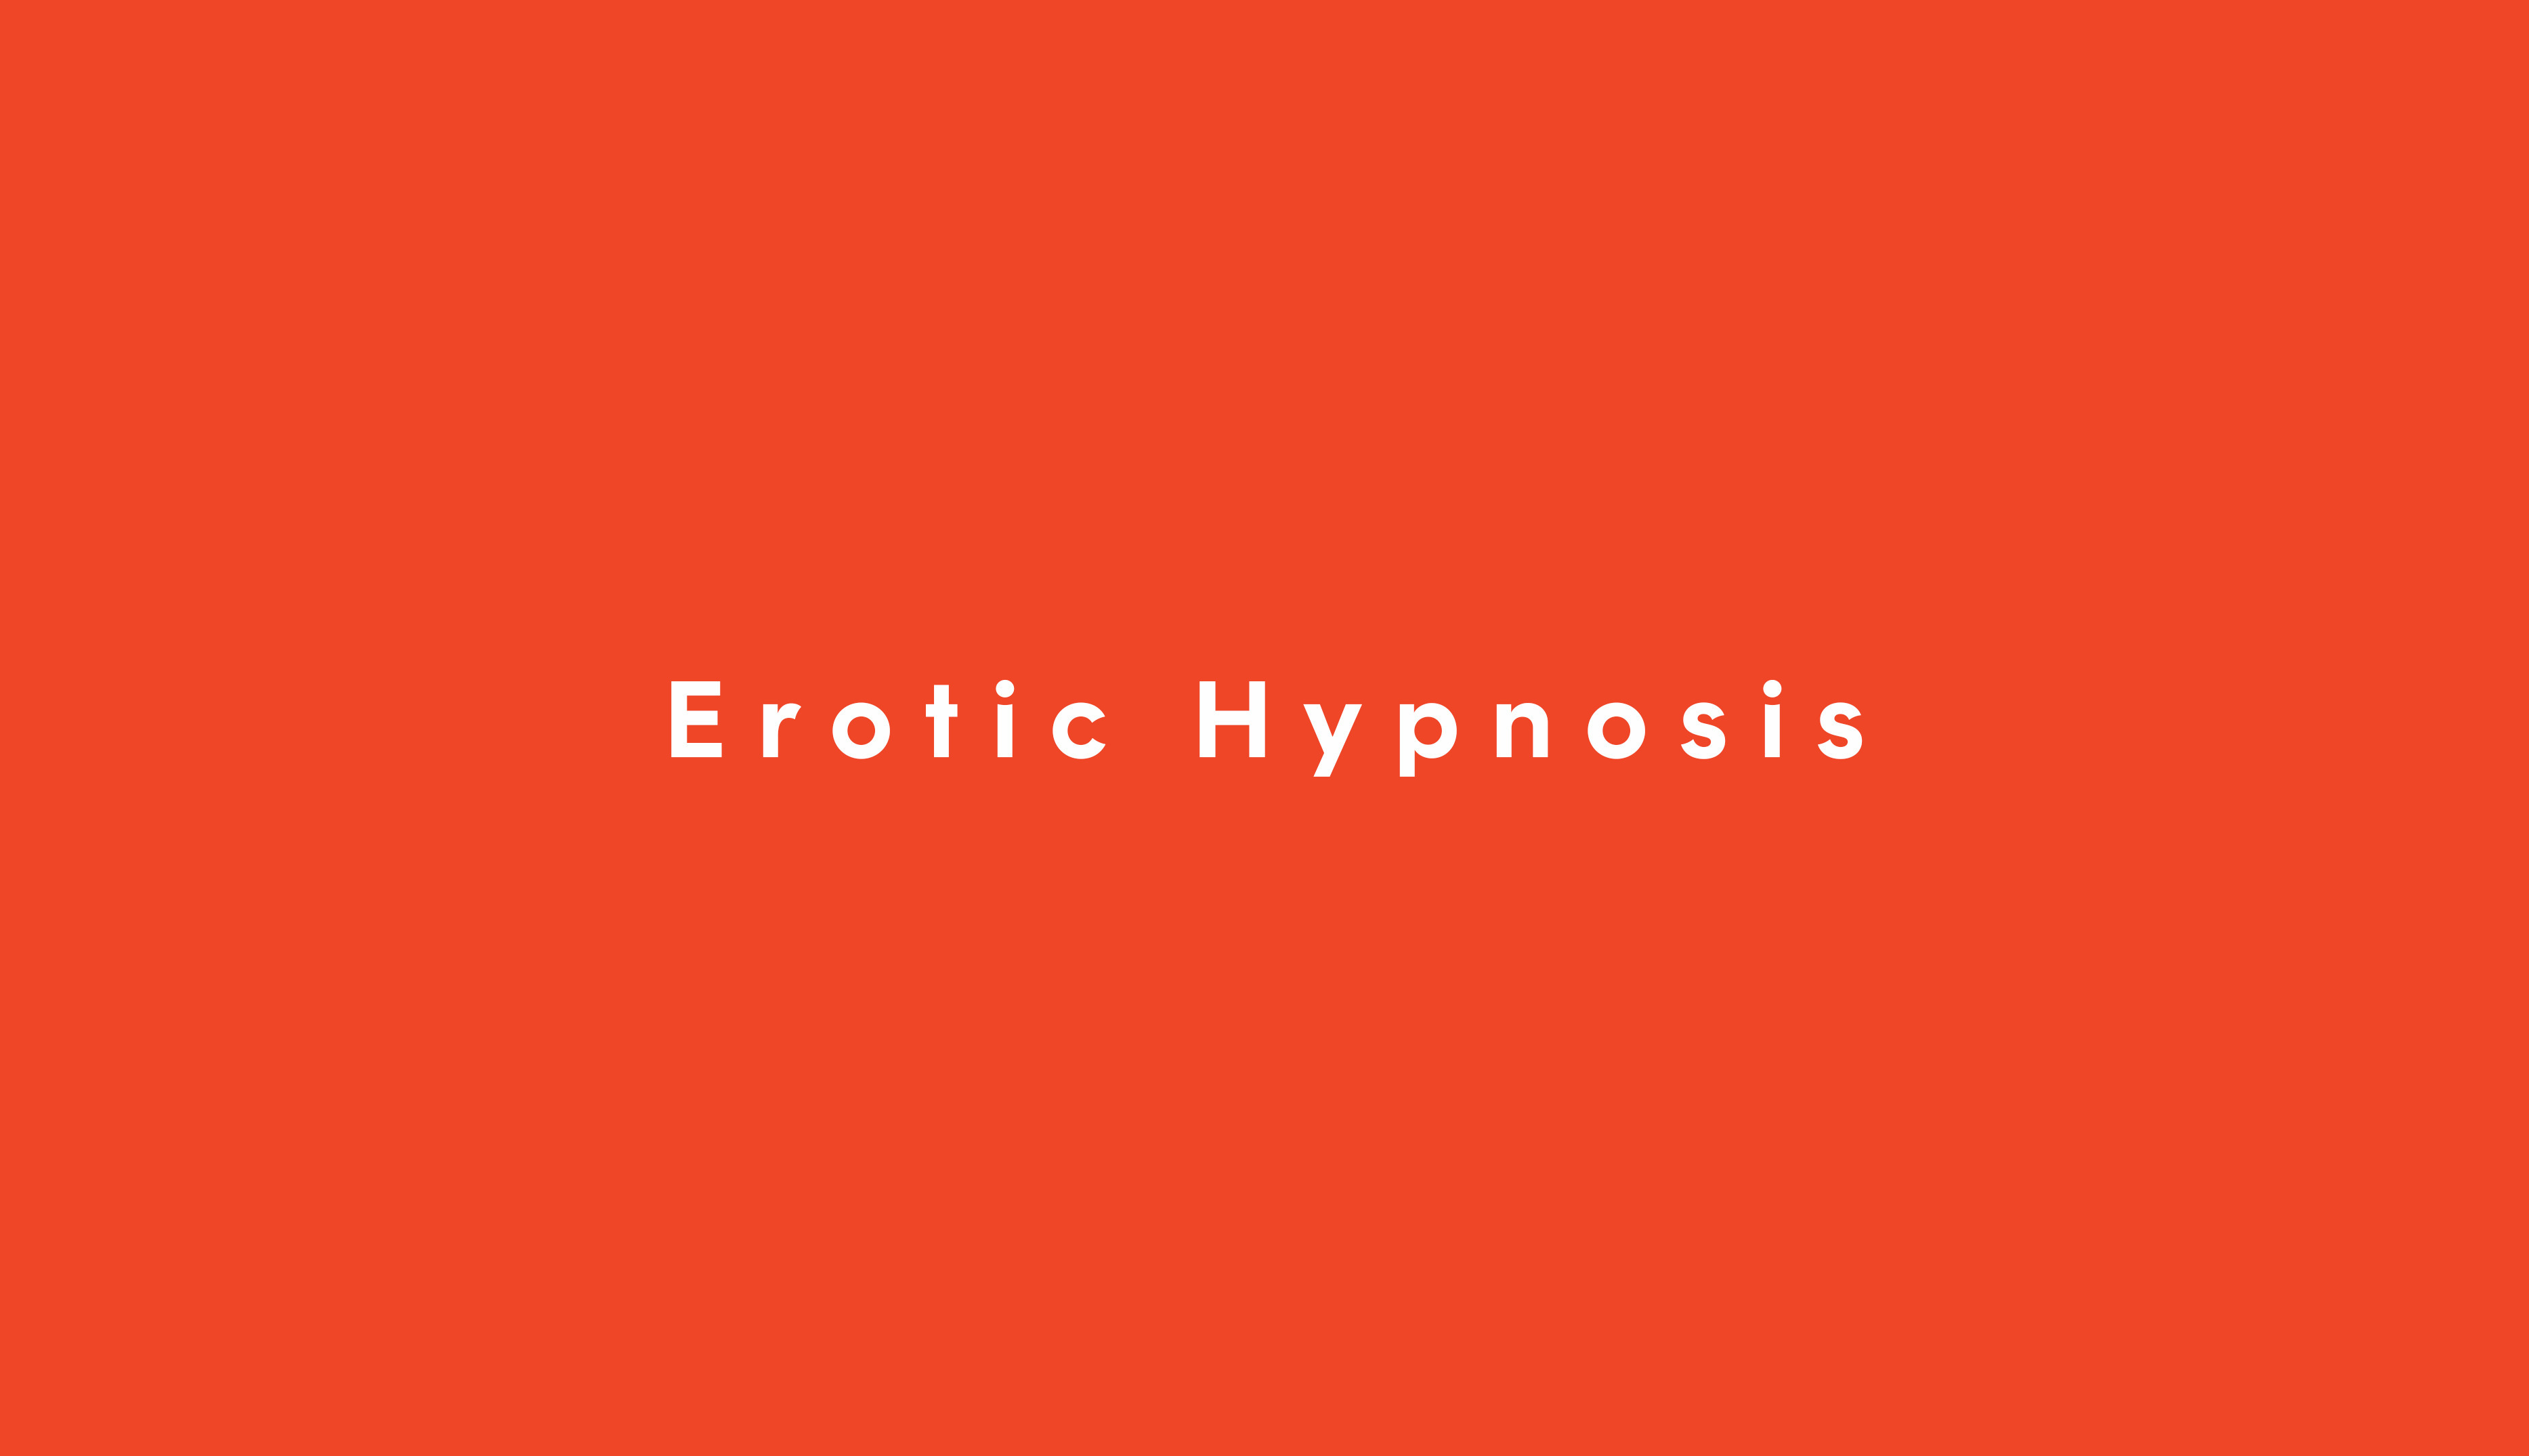 Erotic Hypnosis Turned Me Into a Living Sex Doll